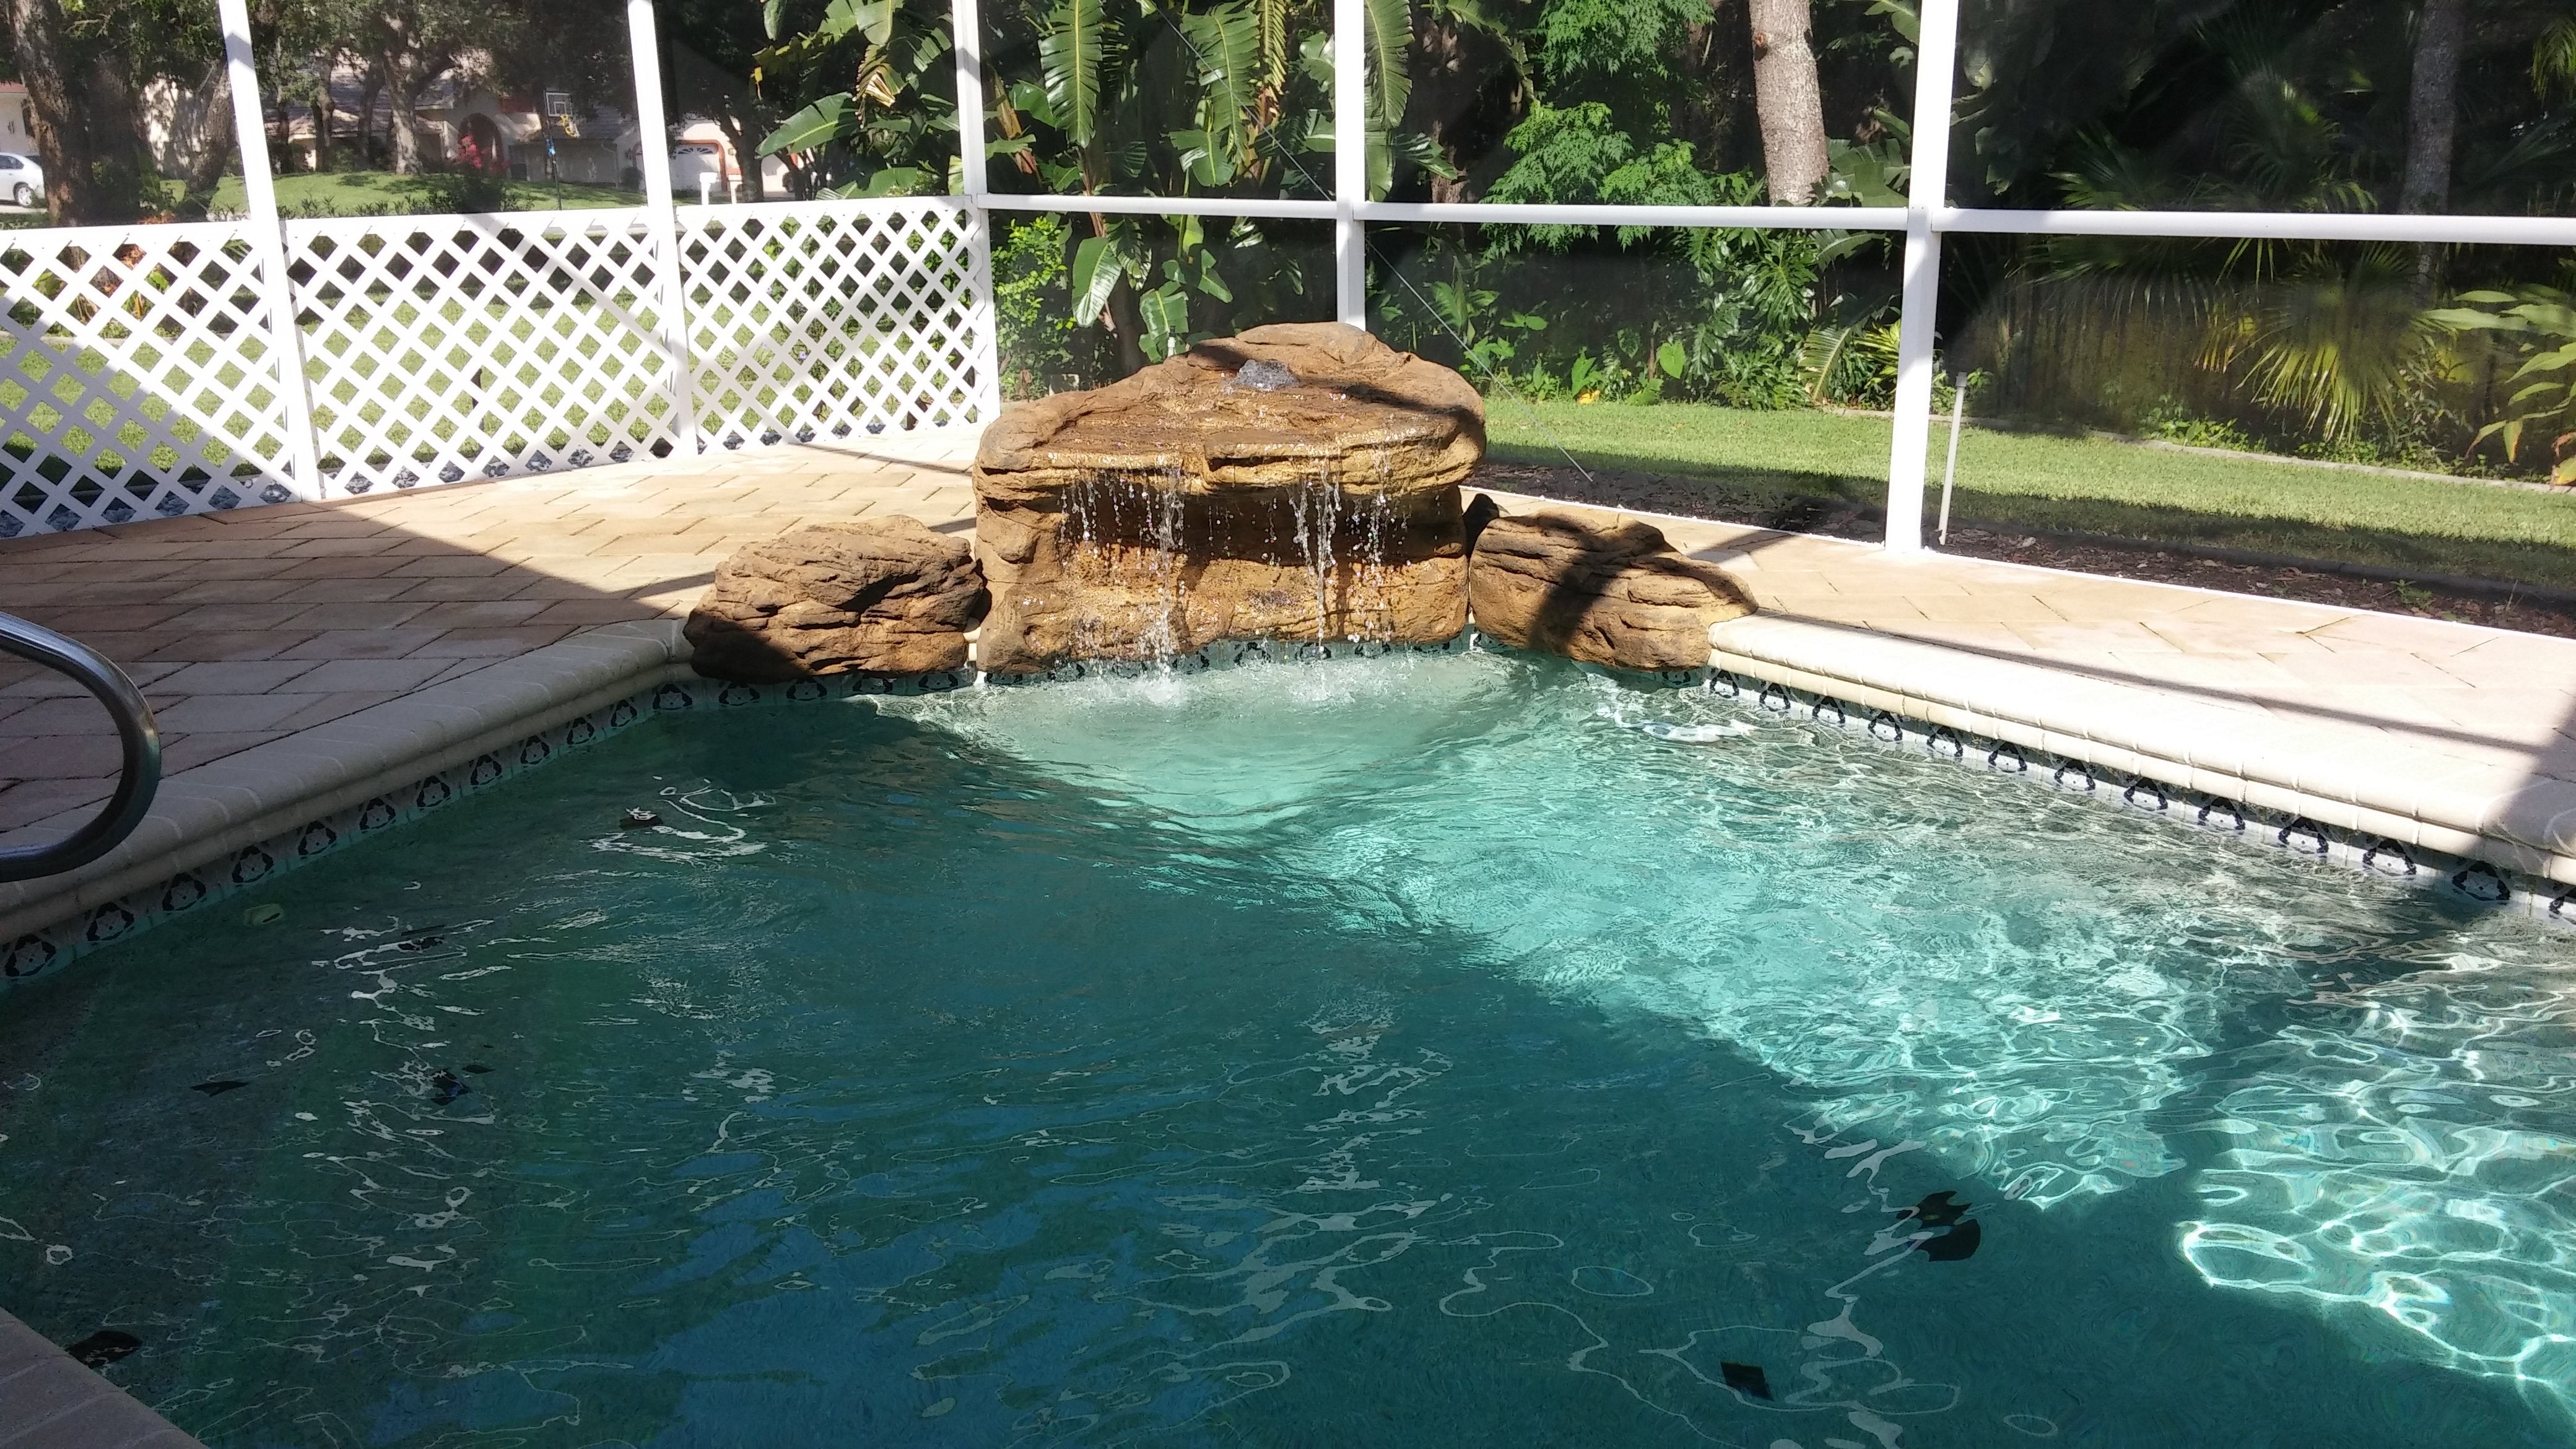 Photo of The Maldives - Complete Swimming Pool Waterfall Kit by Universal Rocks - Marquis Gardens